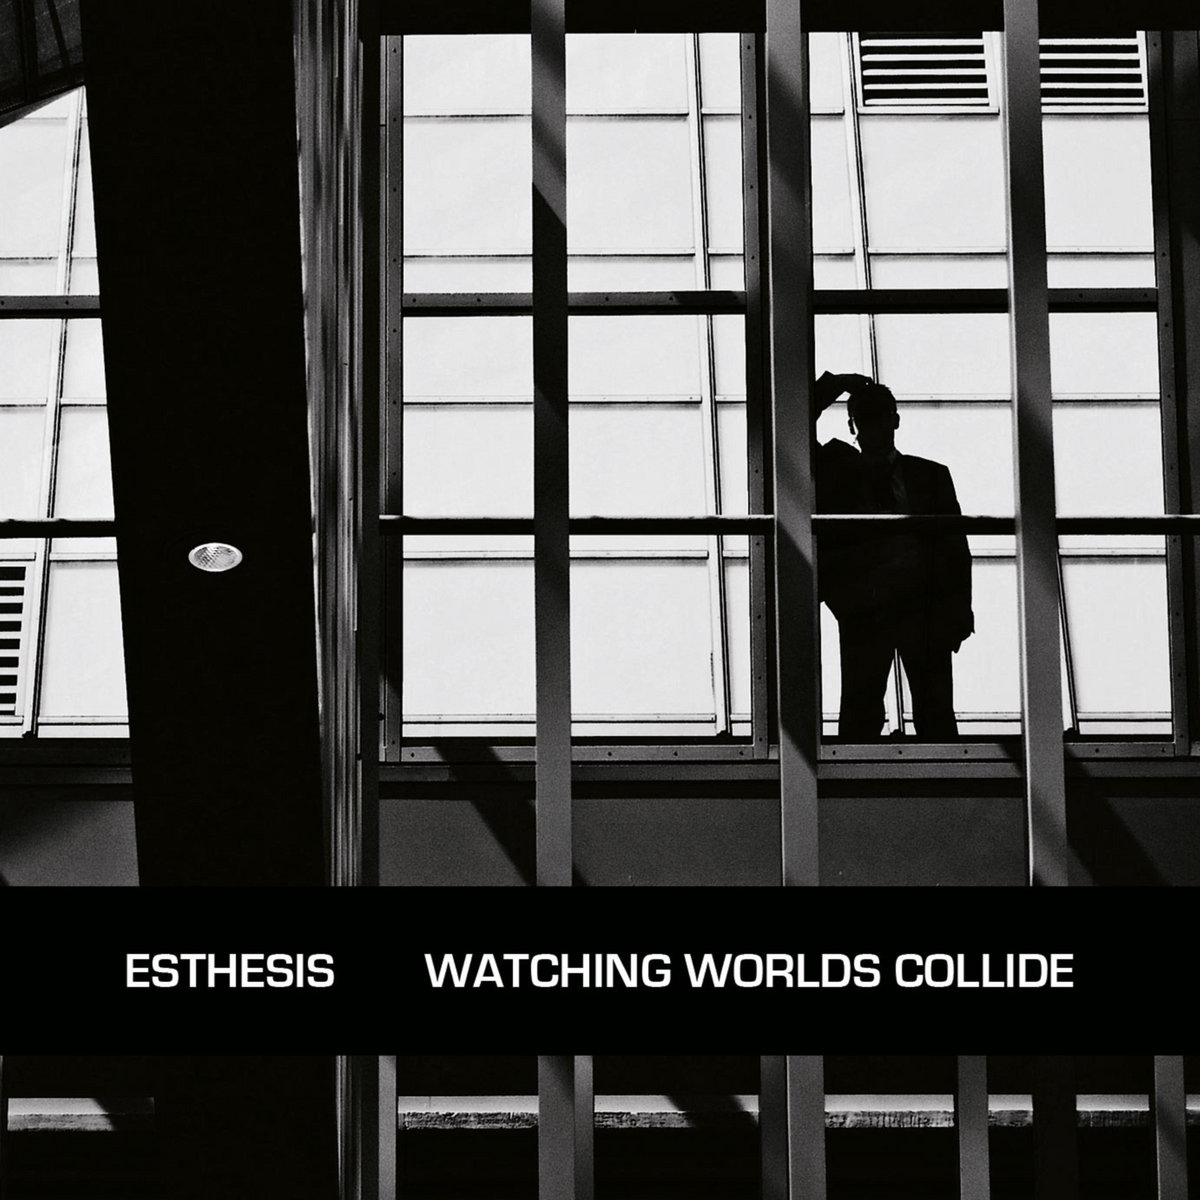 Esthesis: Watching Worlds Collide